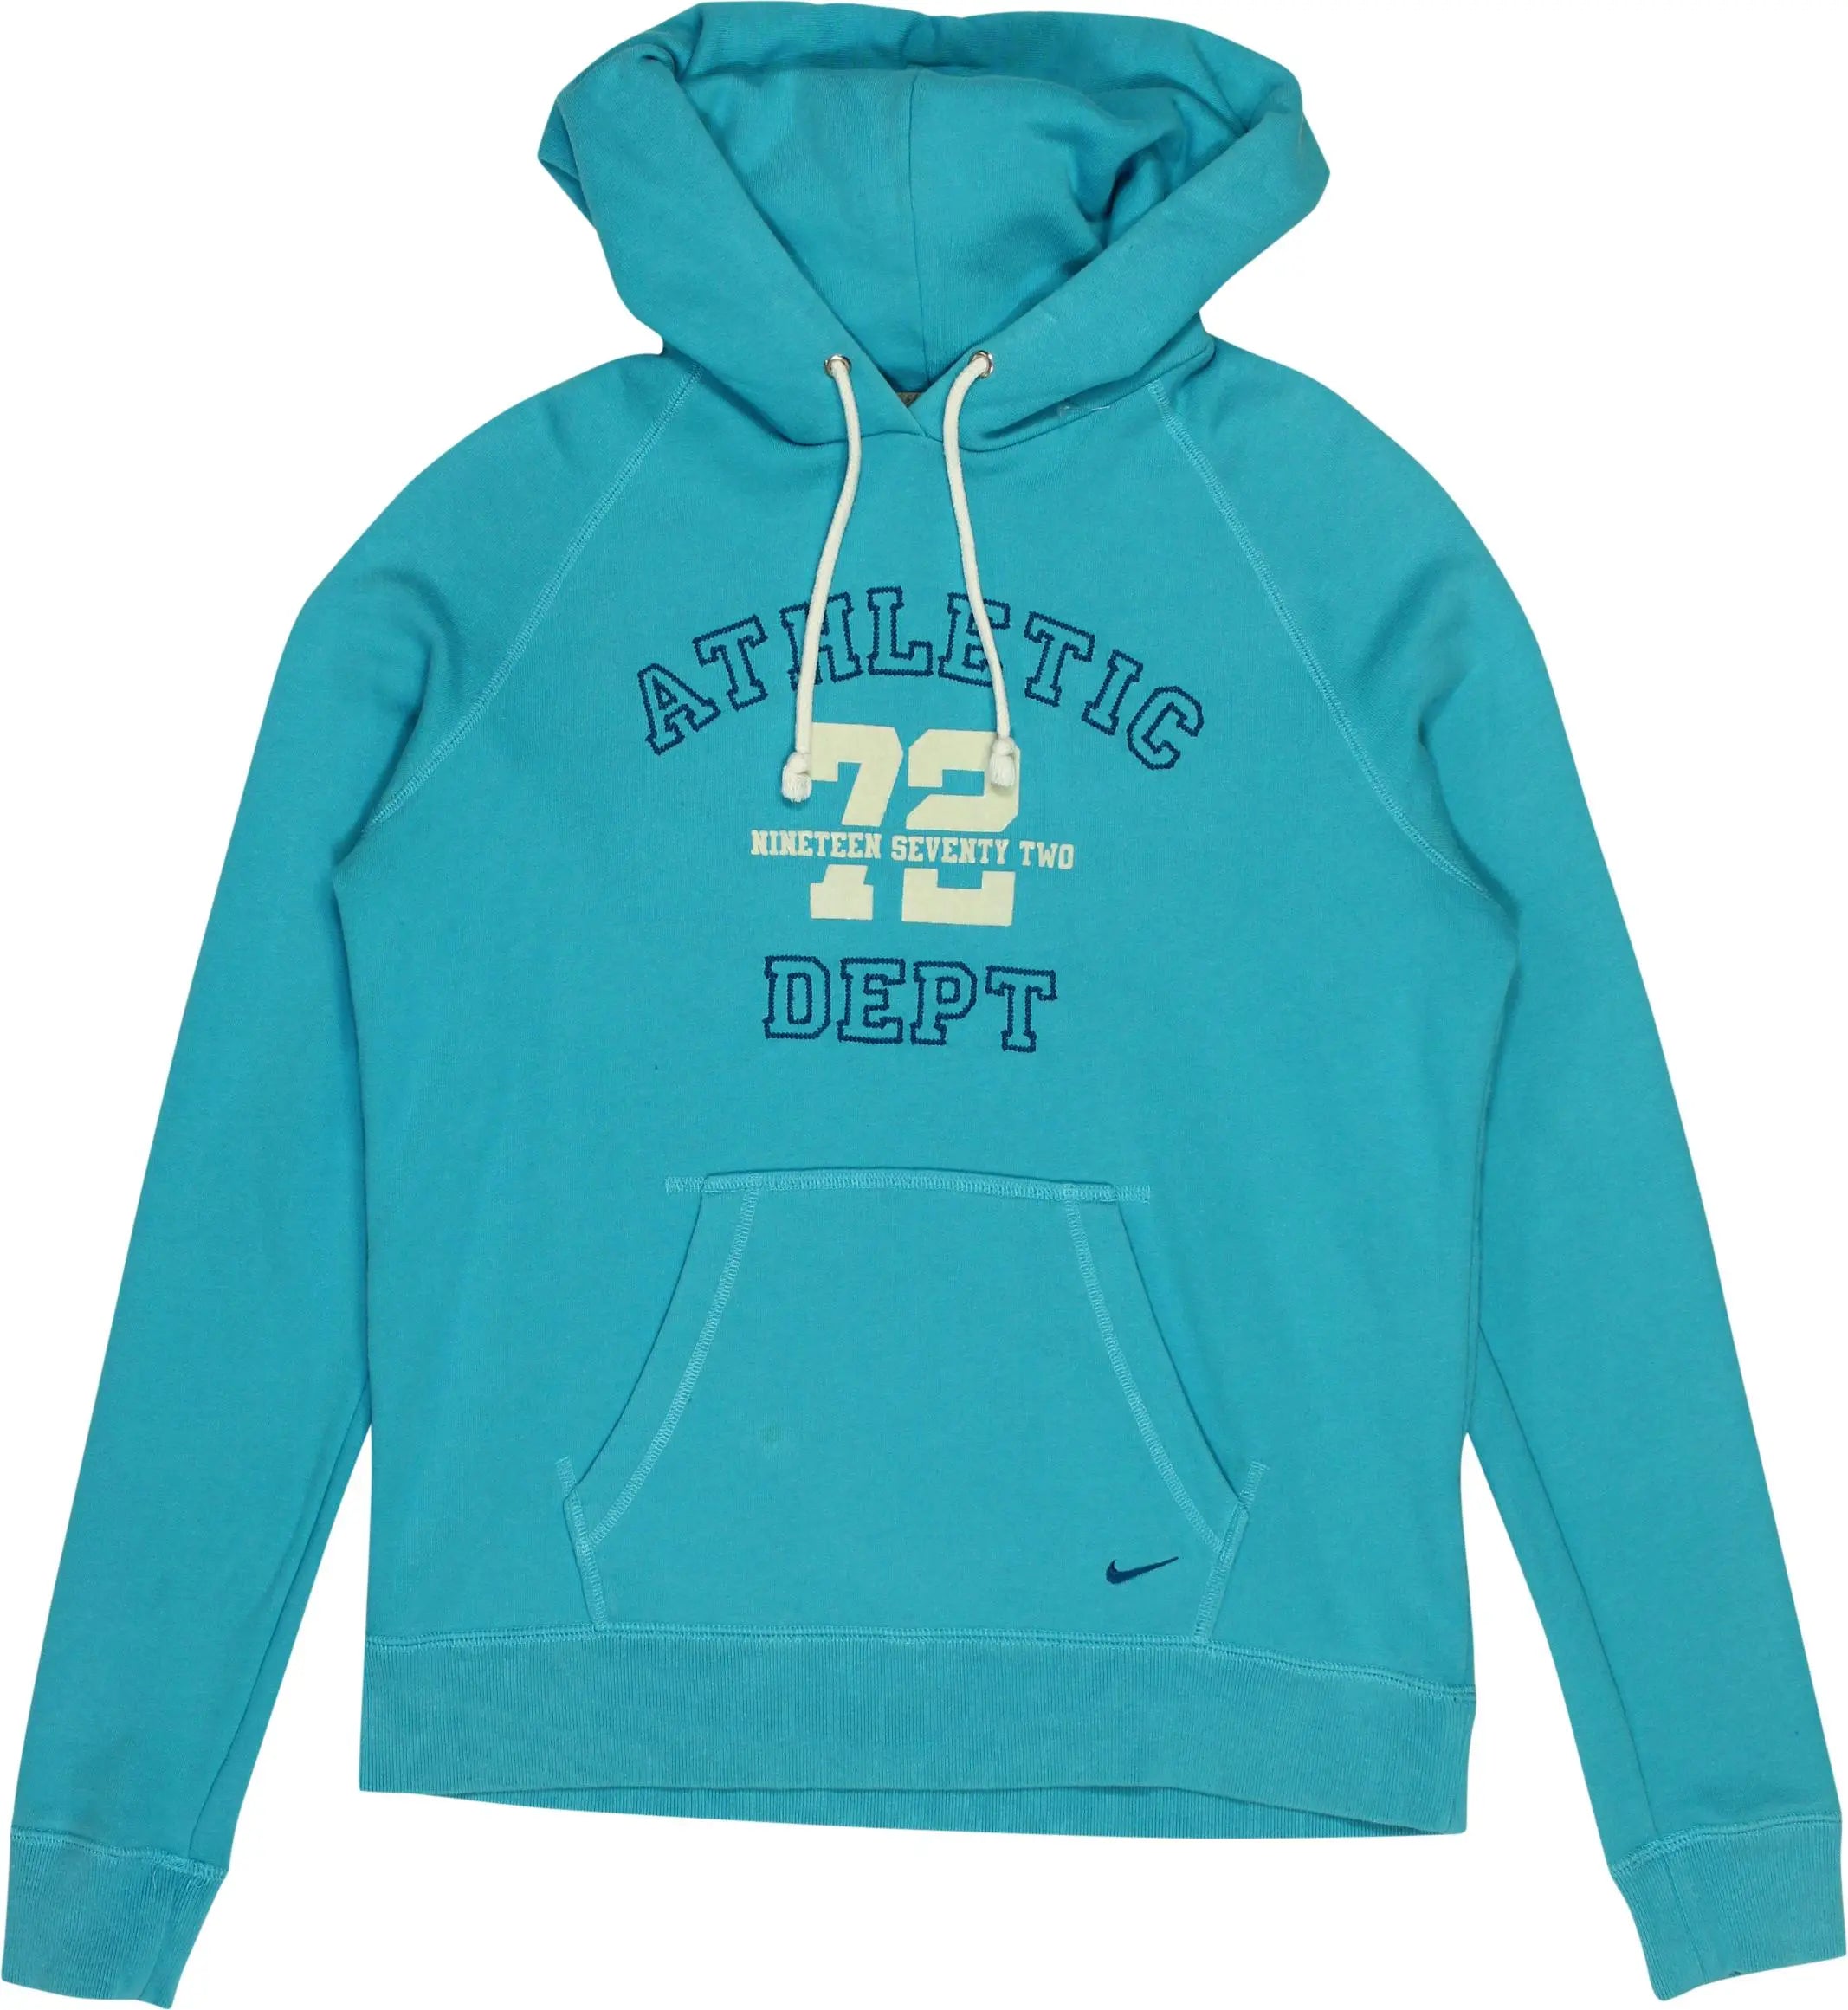 Nike - Blue Hoodie by Nike- ThriftTale.com - Vintage and second handclothing